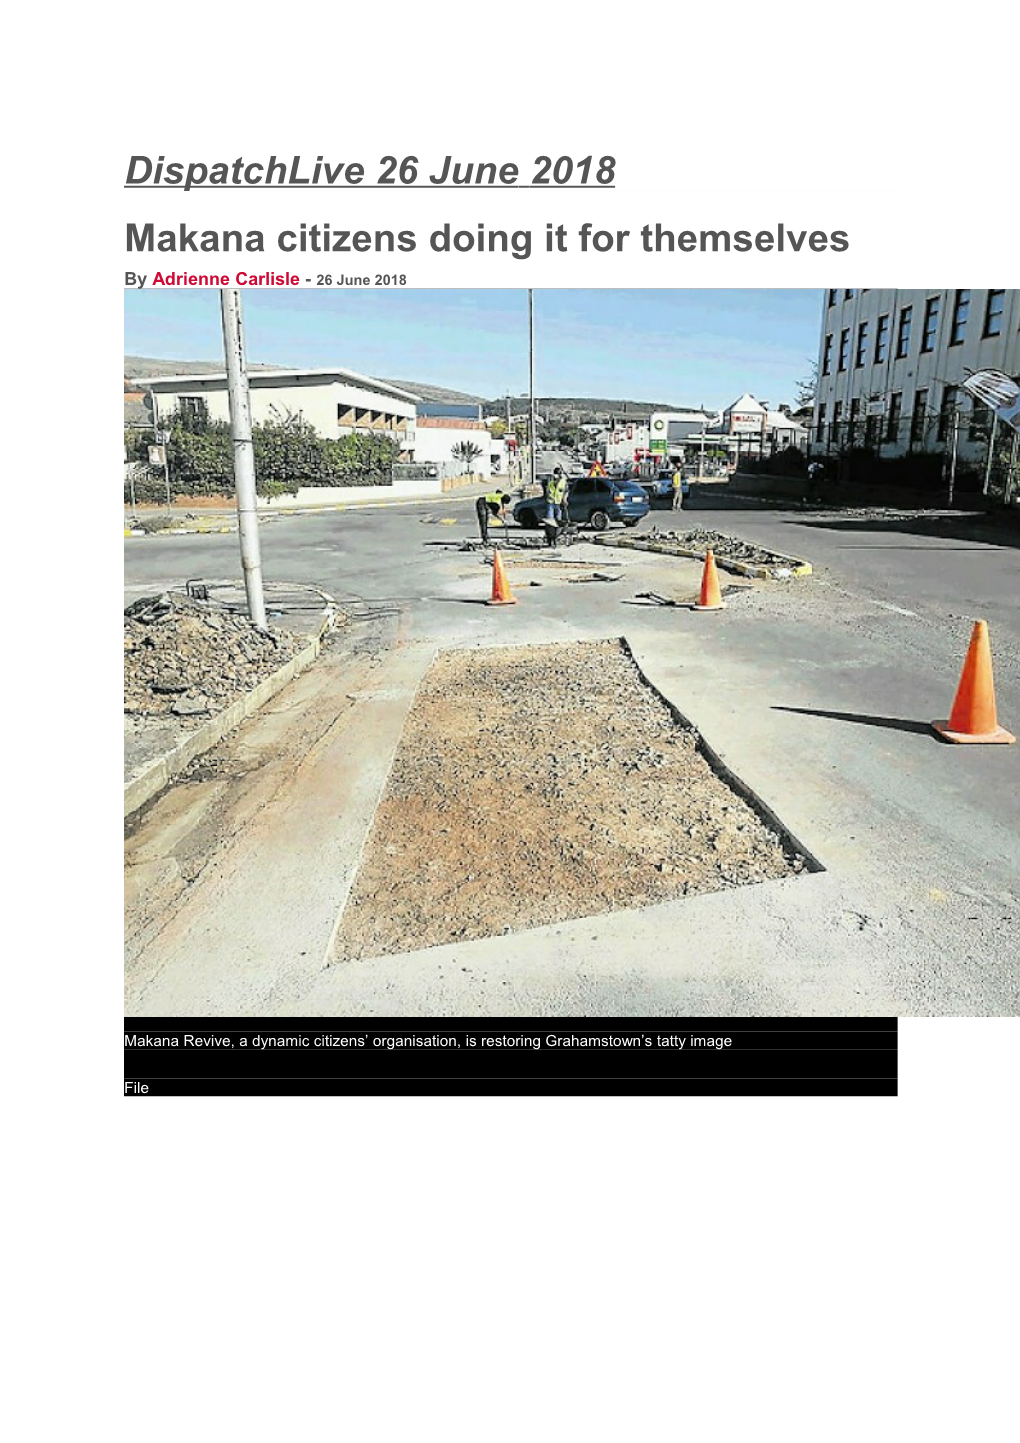 Makana Citizens Doing It for Themselves